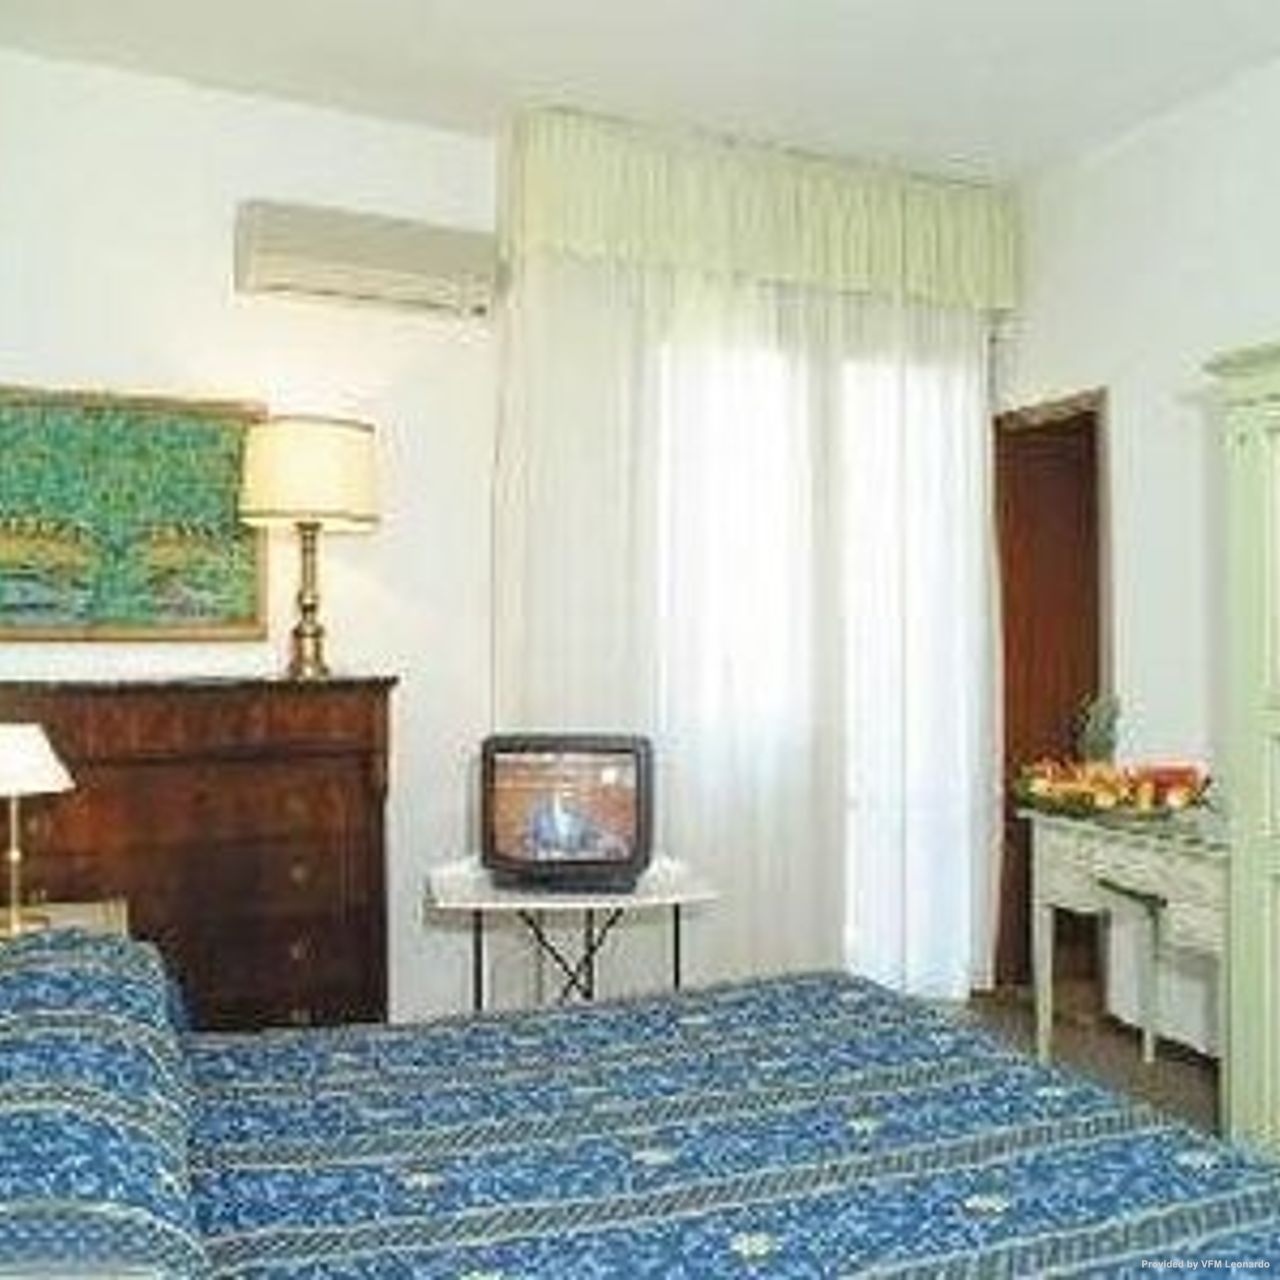 Golf Hotel Corallo - Montecatini Terme - Great prices at HOTEL INFO